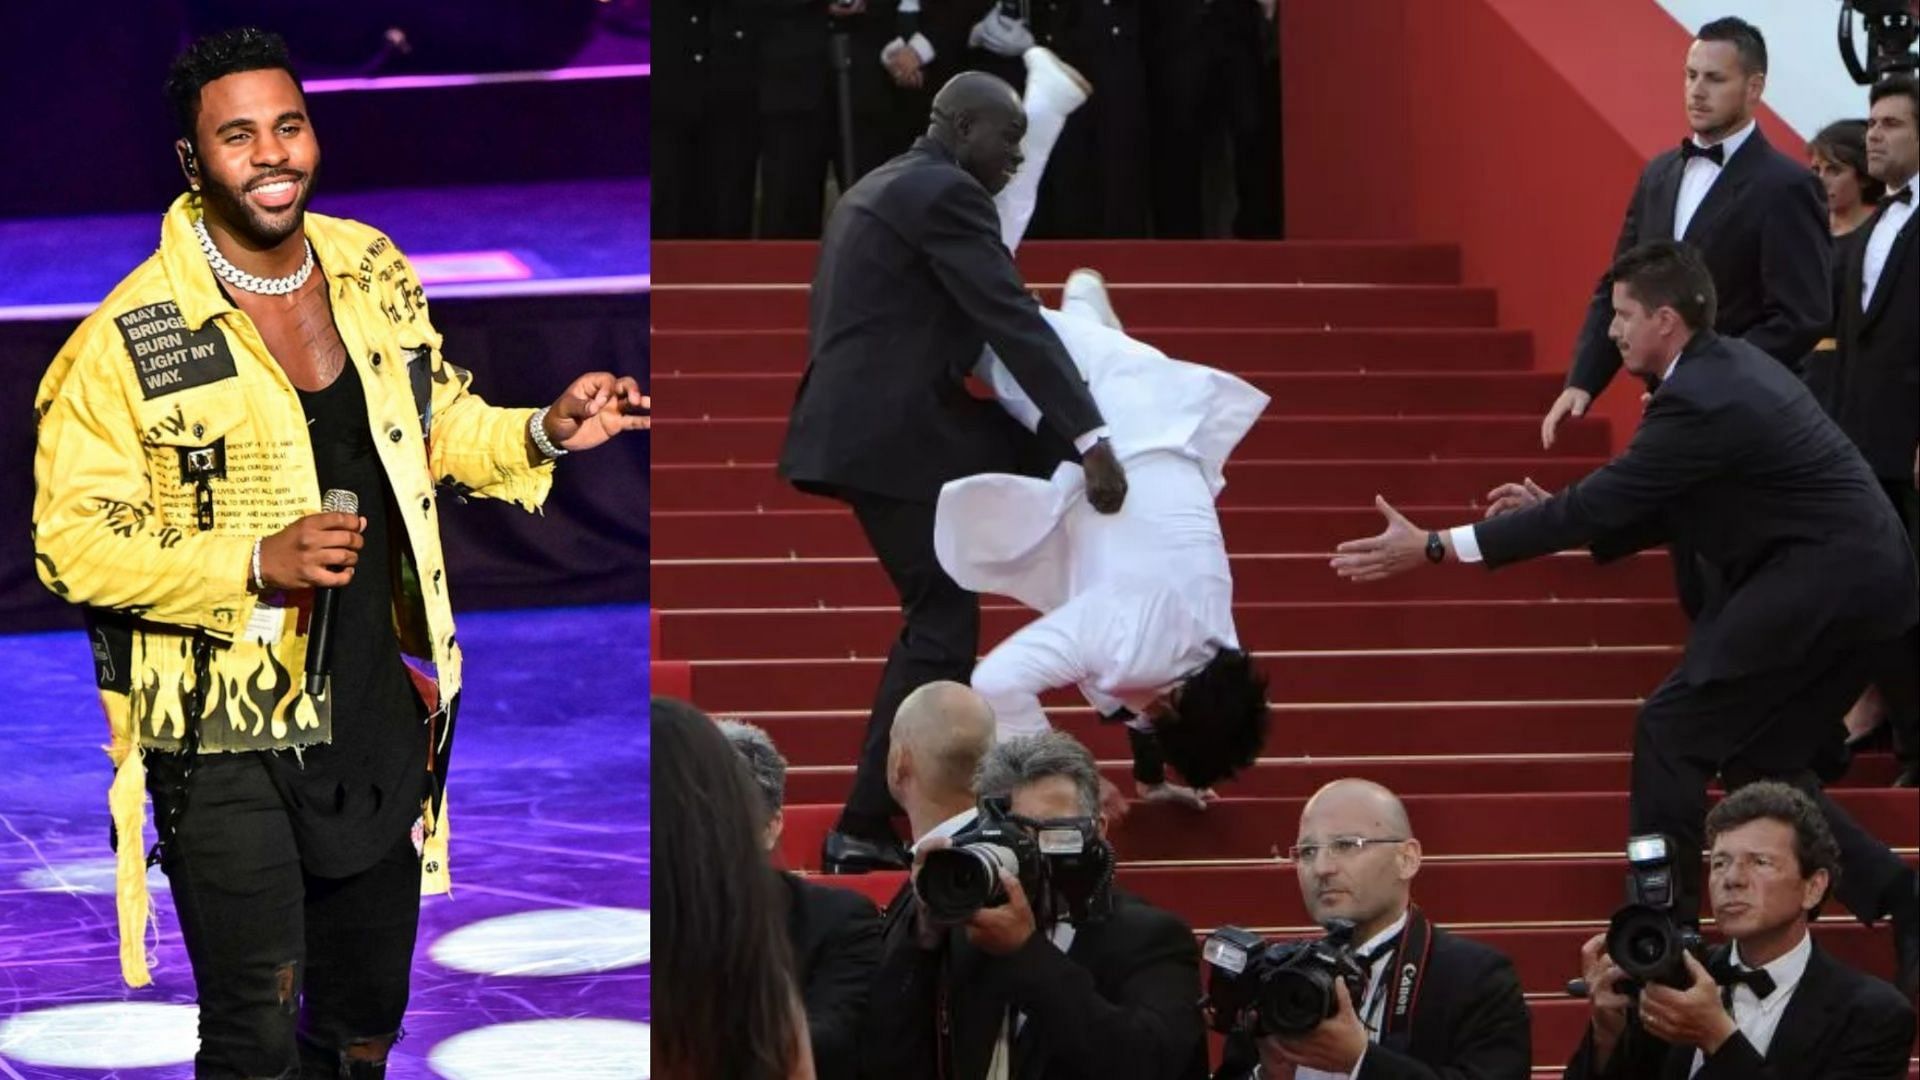 Viral claim about Jason Derulo falling down the stairs at the Met Gala has been debunked. (Image via Getty Images)